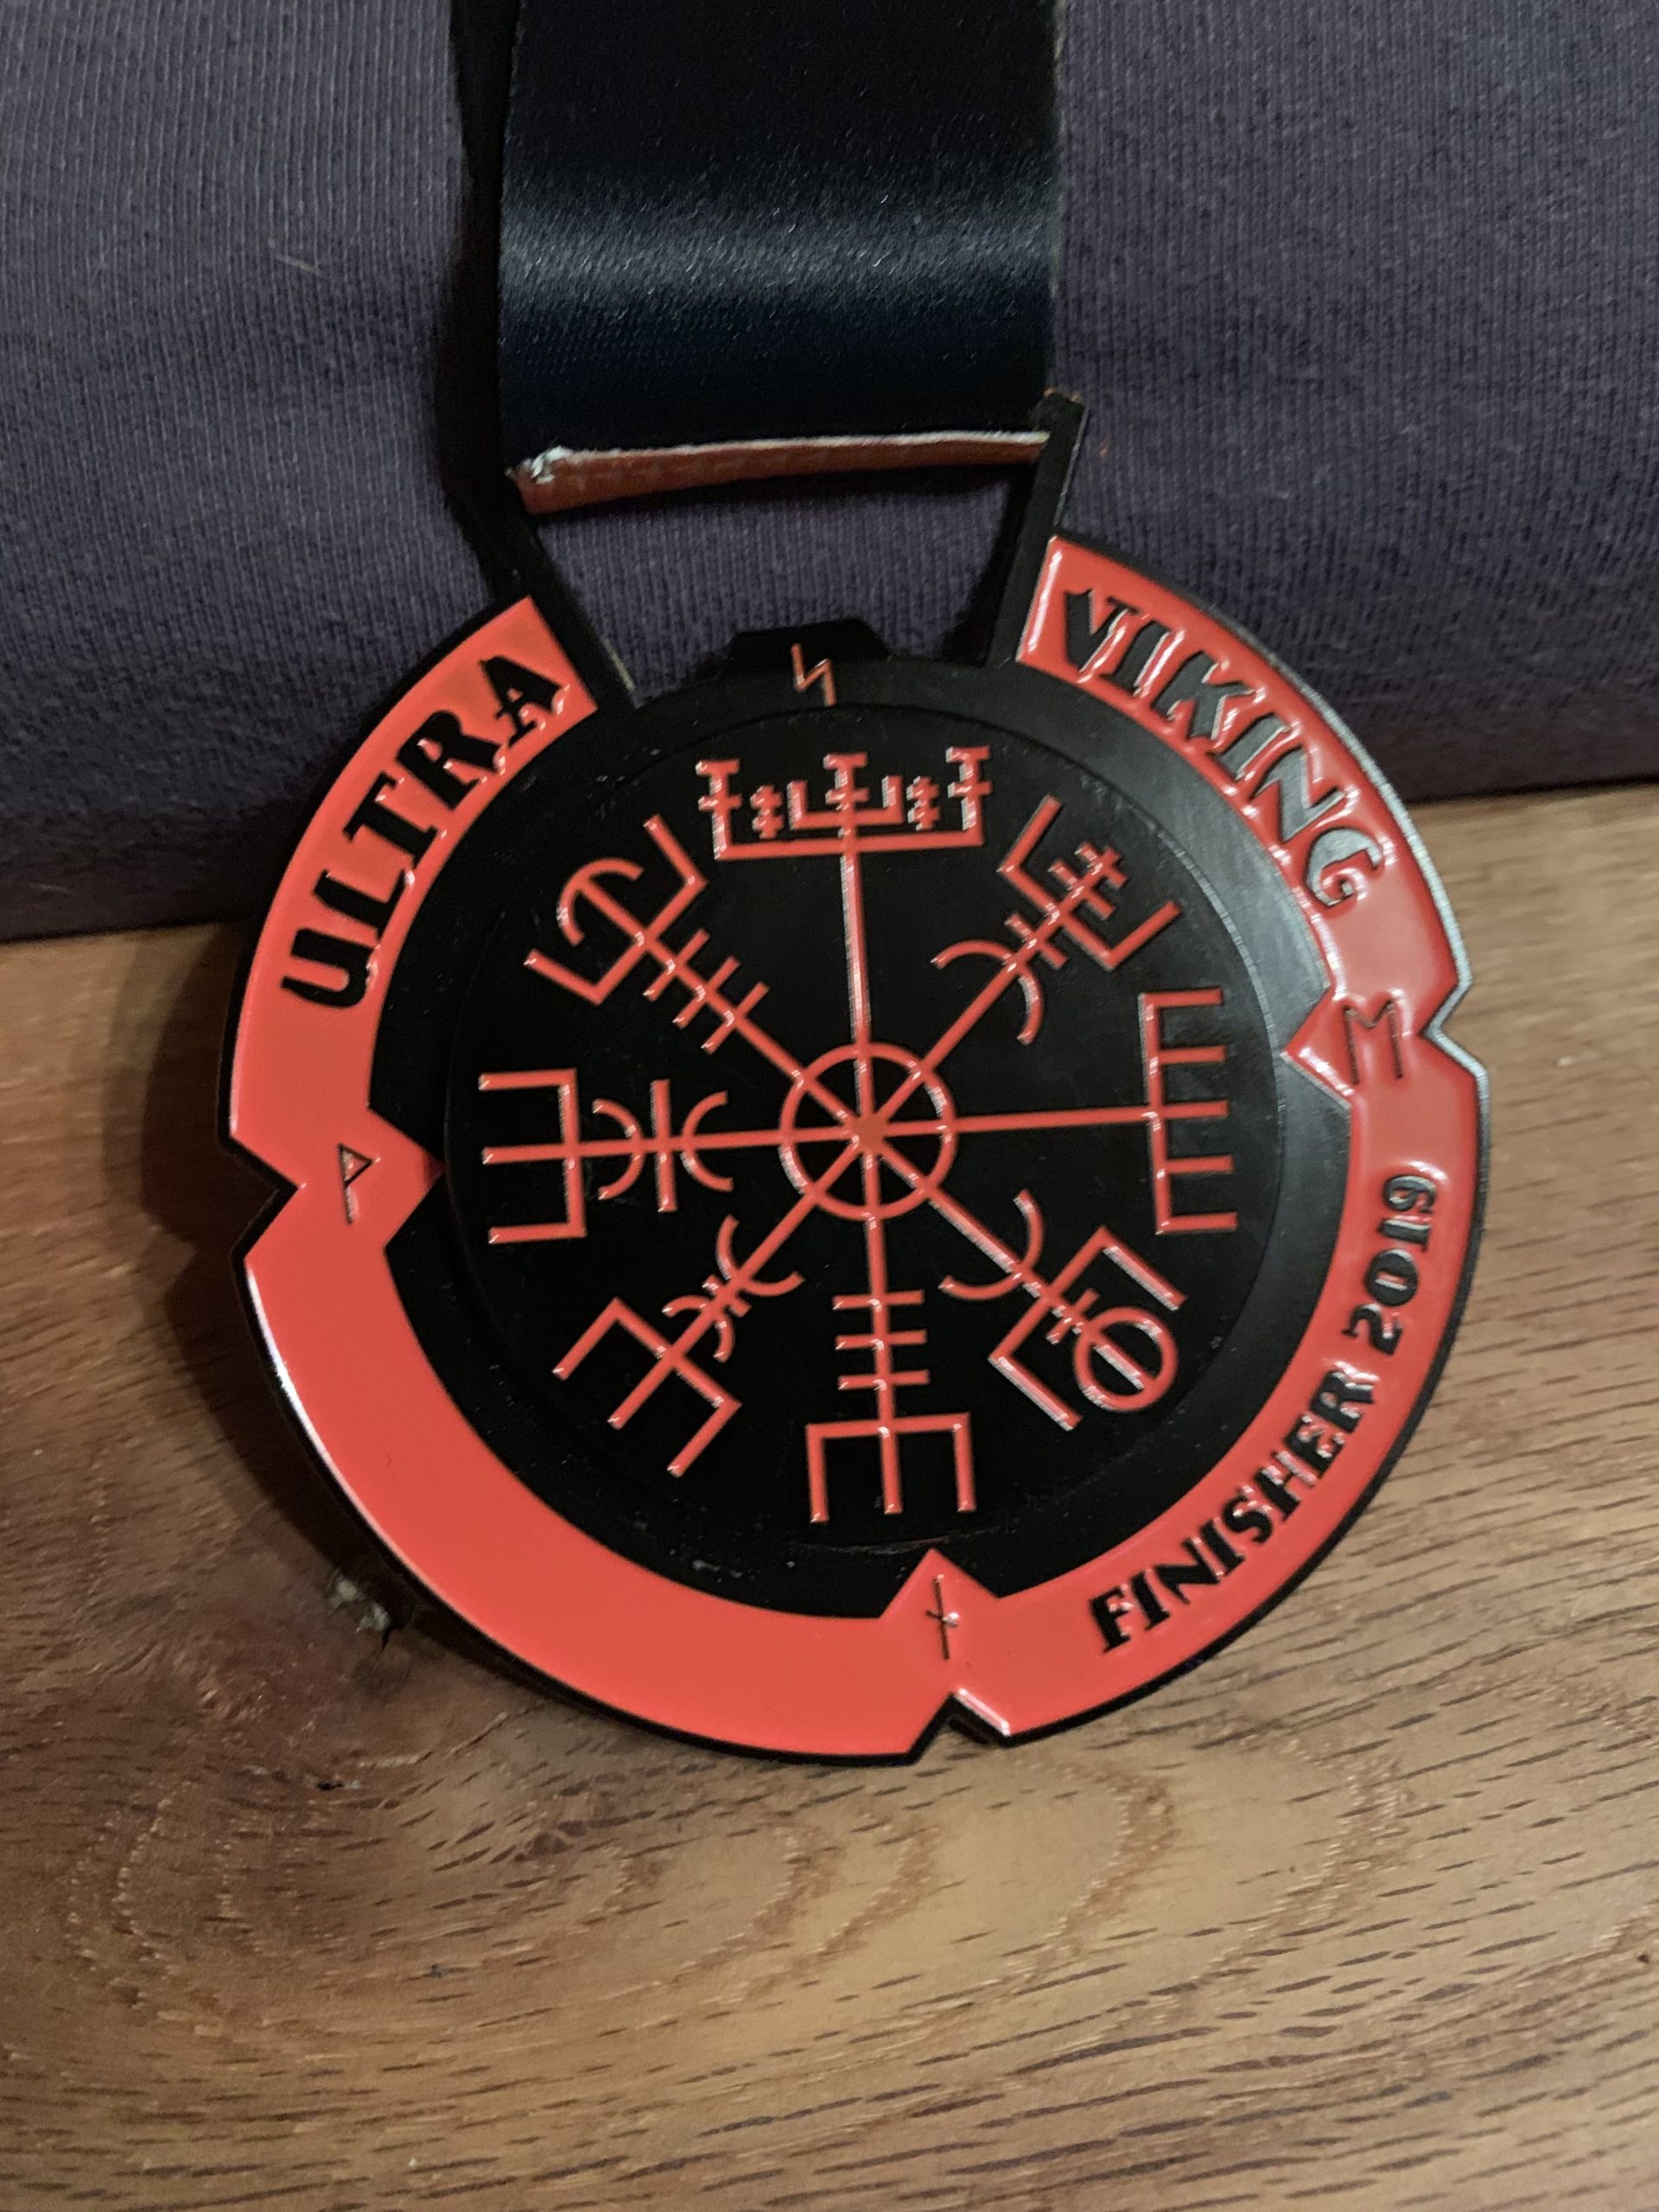 Read more about the article Ultra Viking beim Strong Viking Warstein 2019